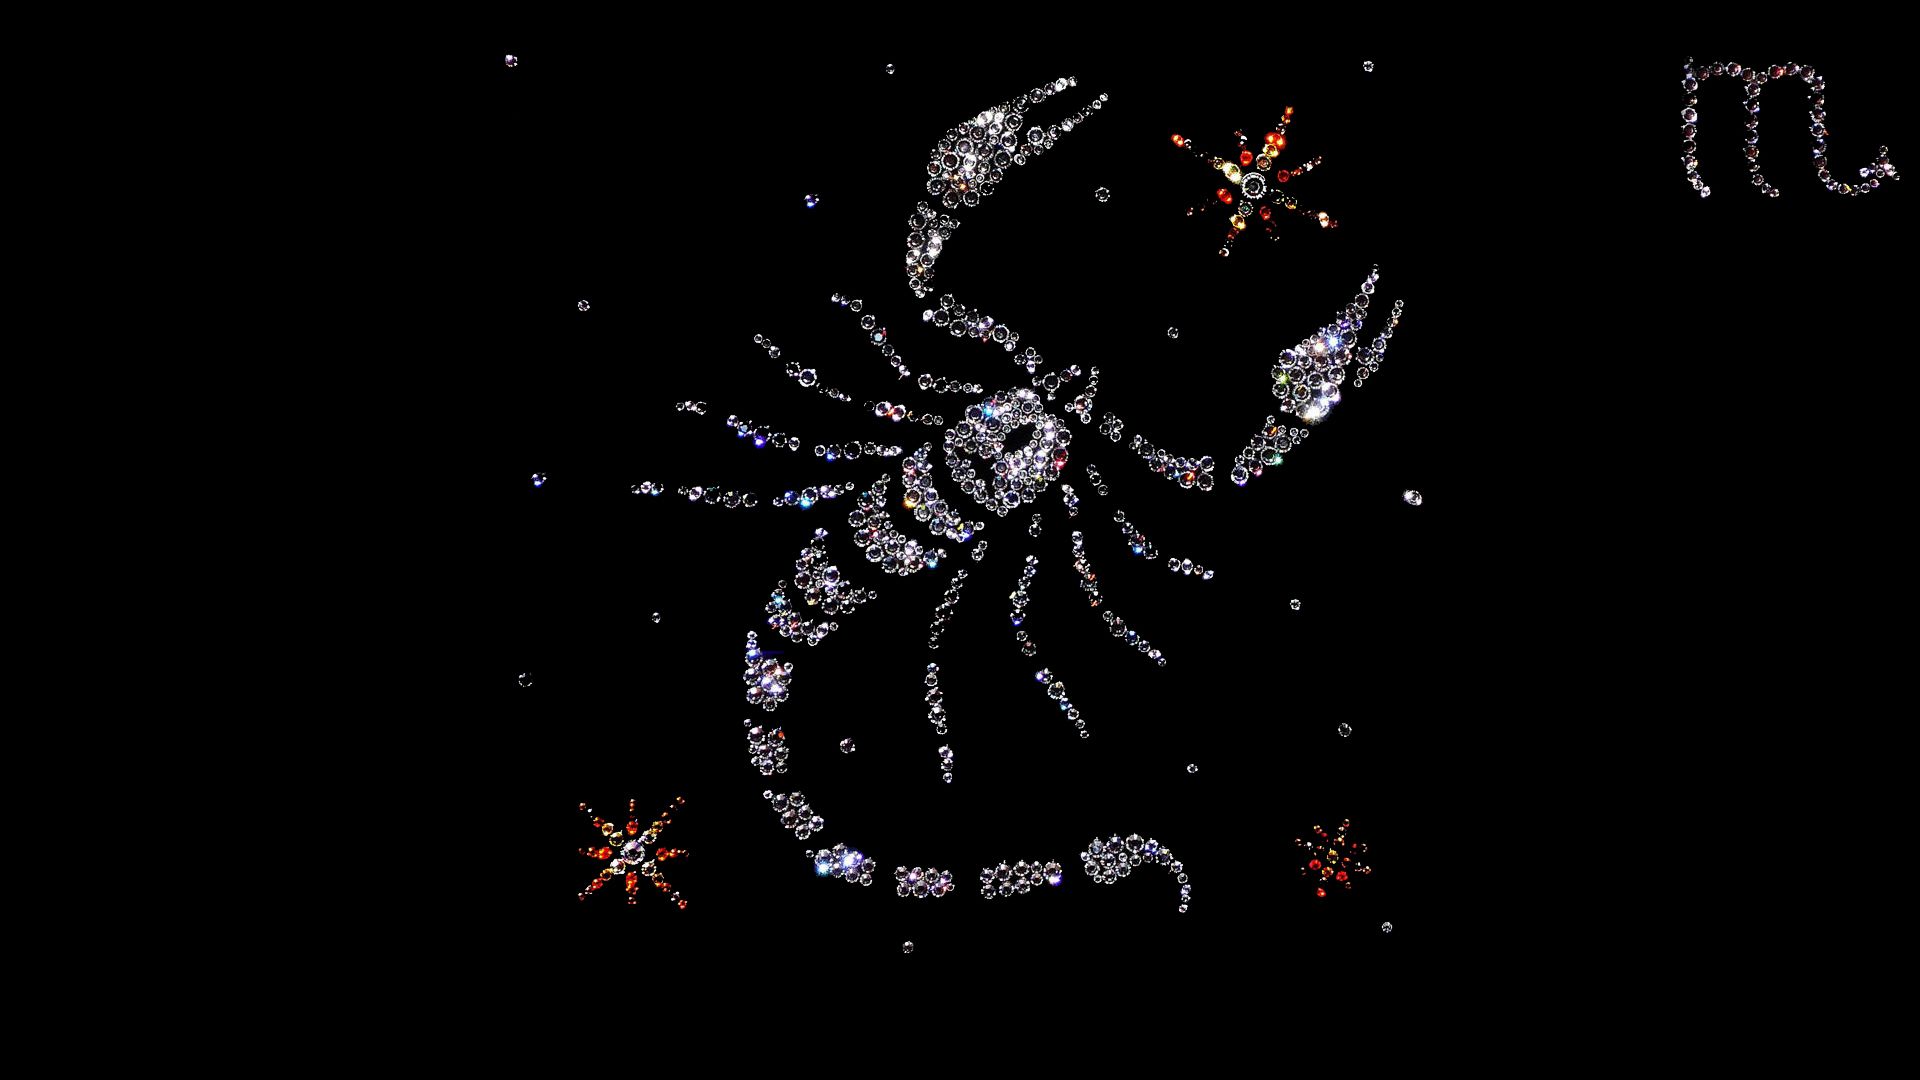 Scorpio from precious stones wallpapers and images - wallpapers